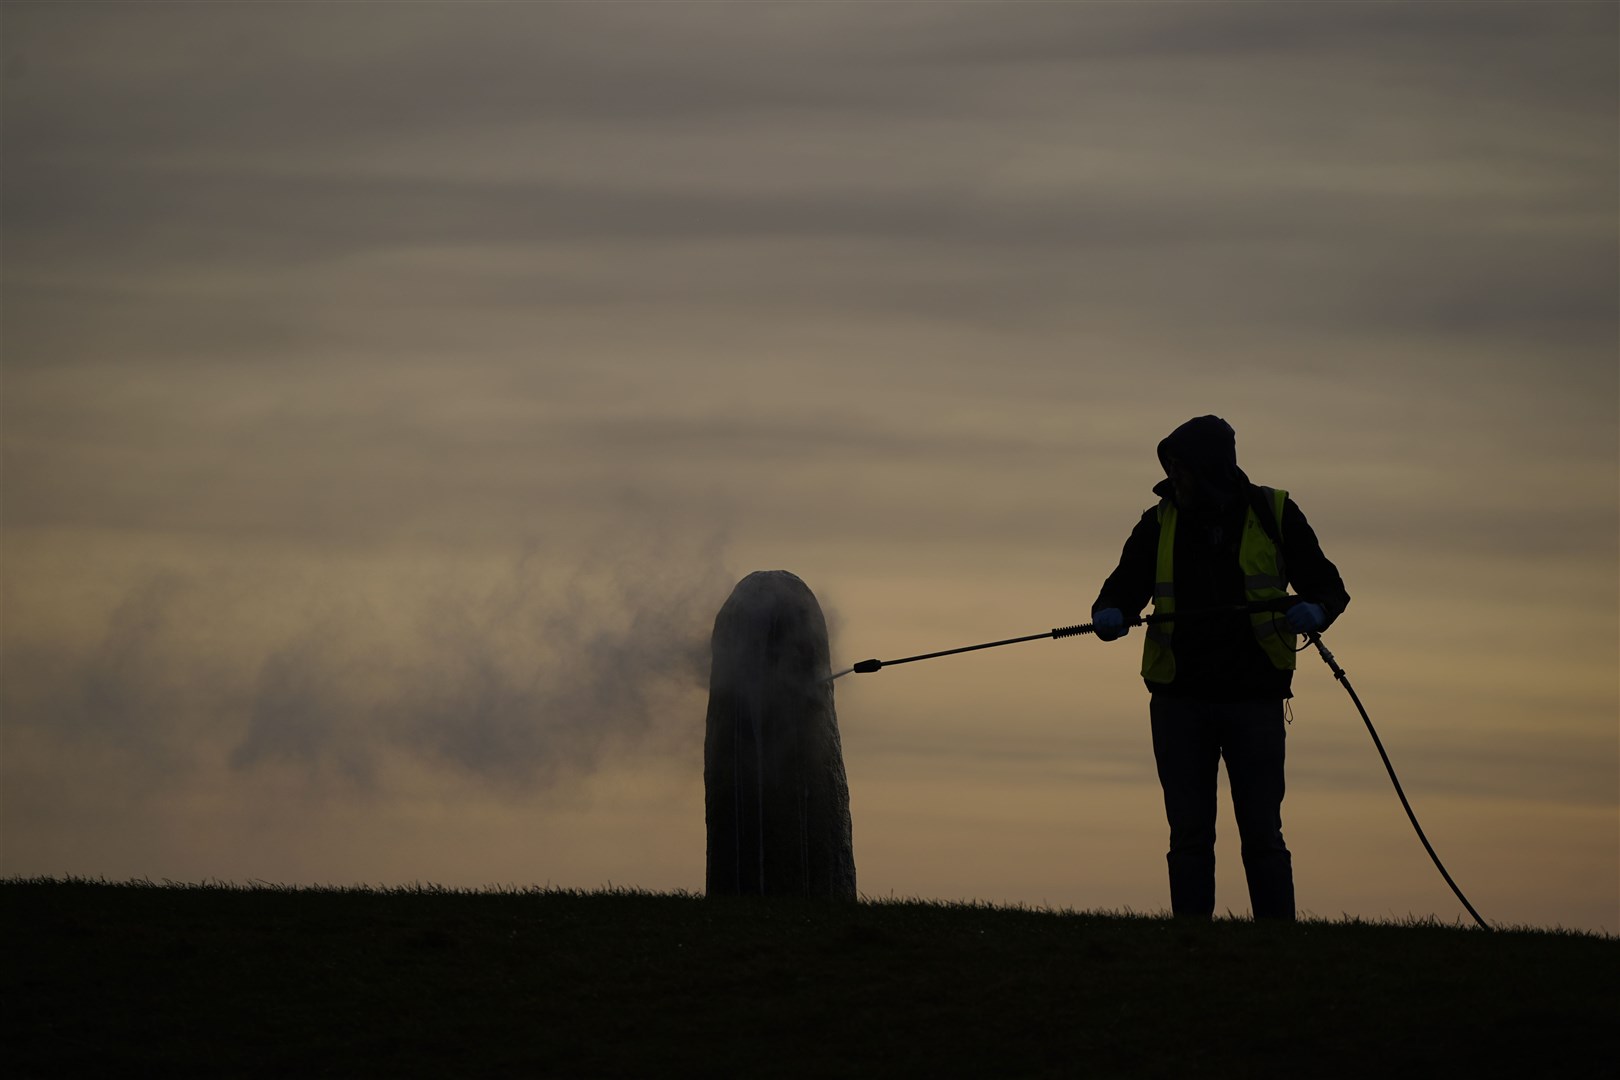 A worker from the office of public works begin the clean up of graffiti on the Lia Fail standing stone, which is also known as the Stone of Destiny, on the Hill of Tara near Skryne in County Meath (Niall Carson/PA)